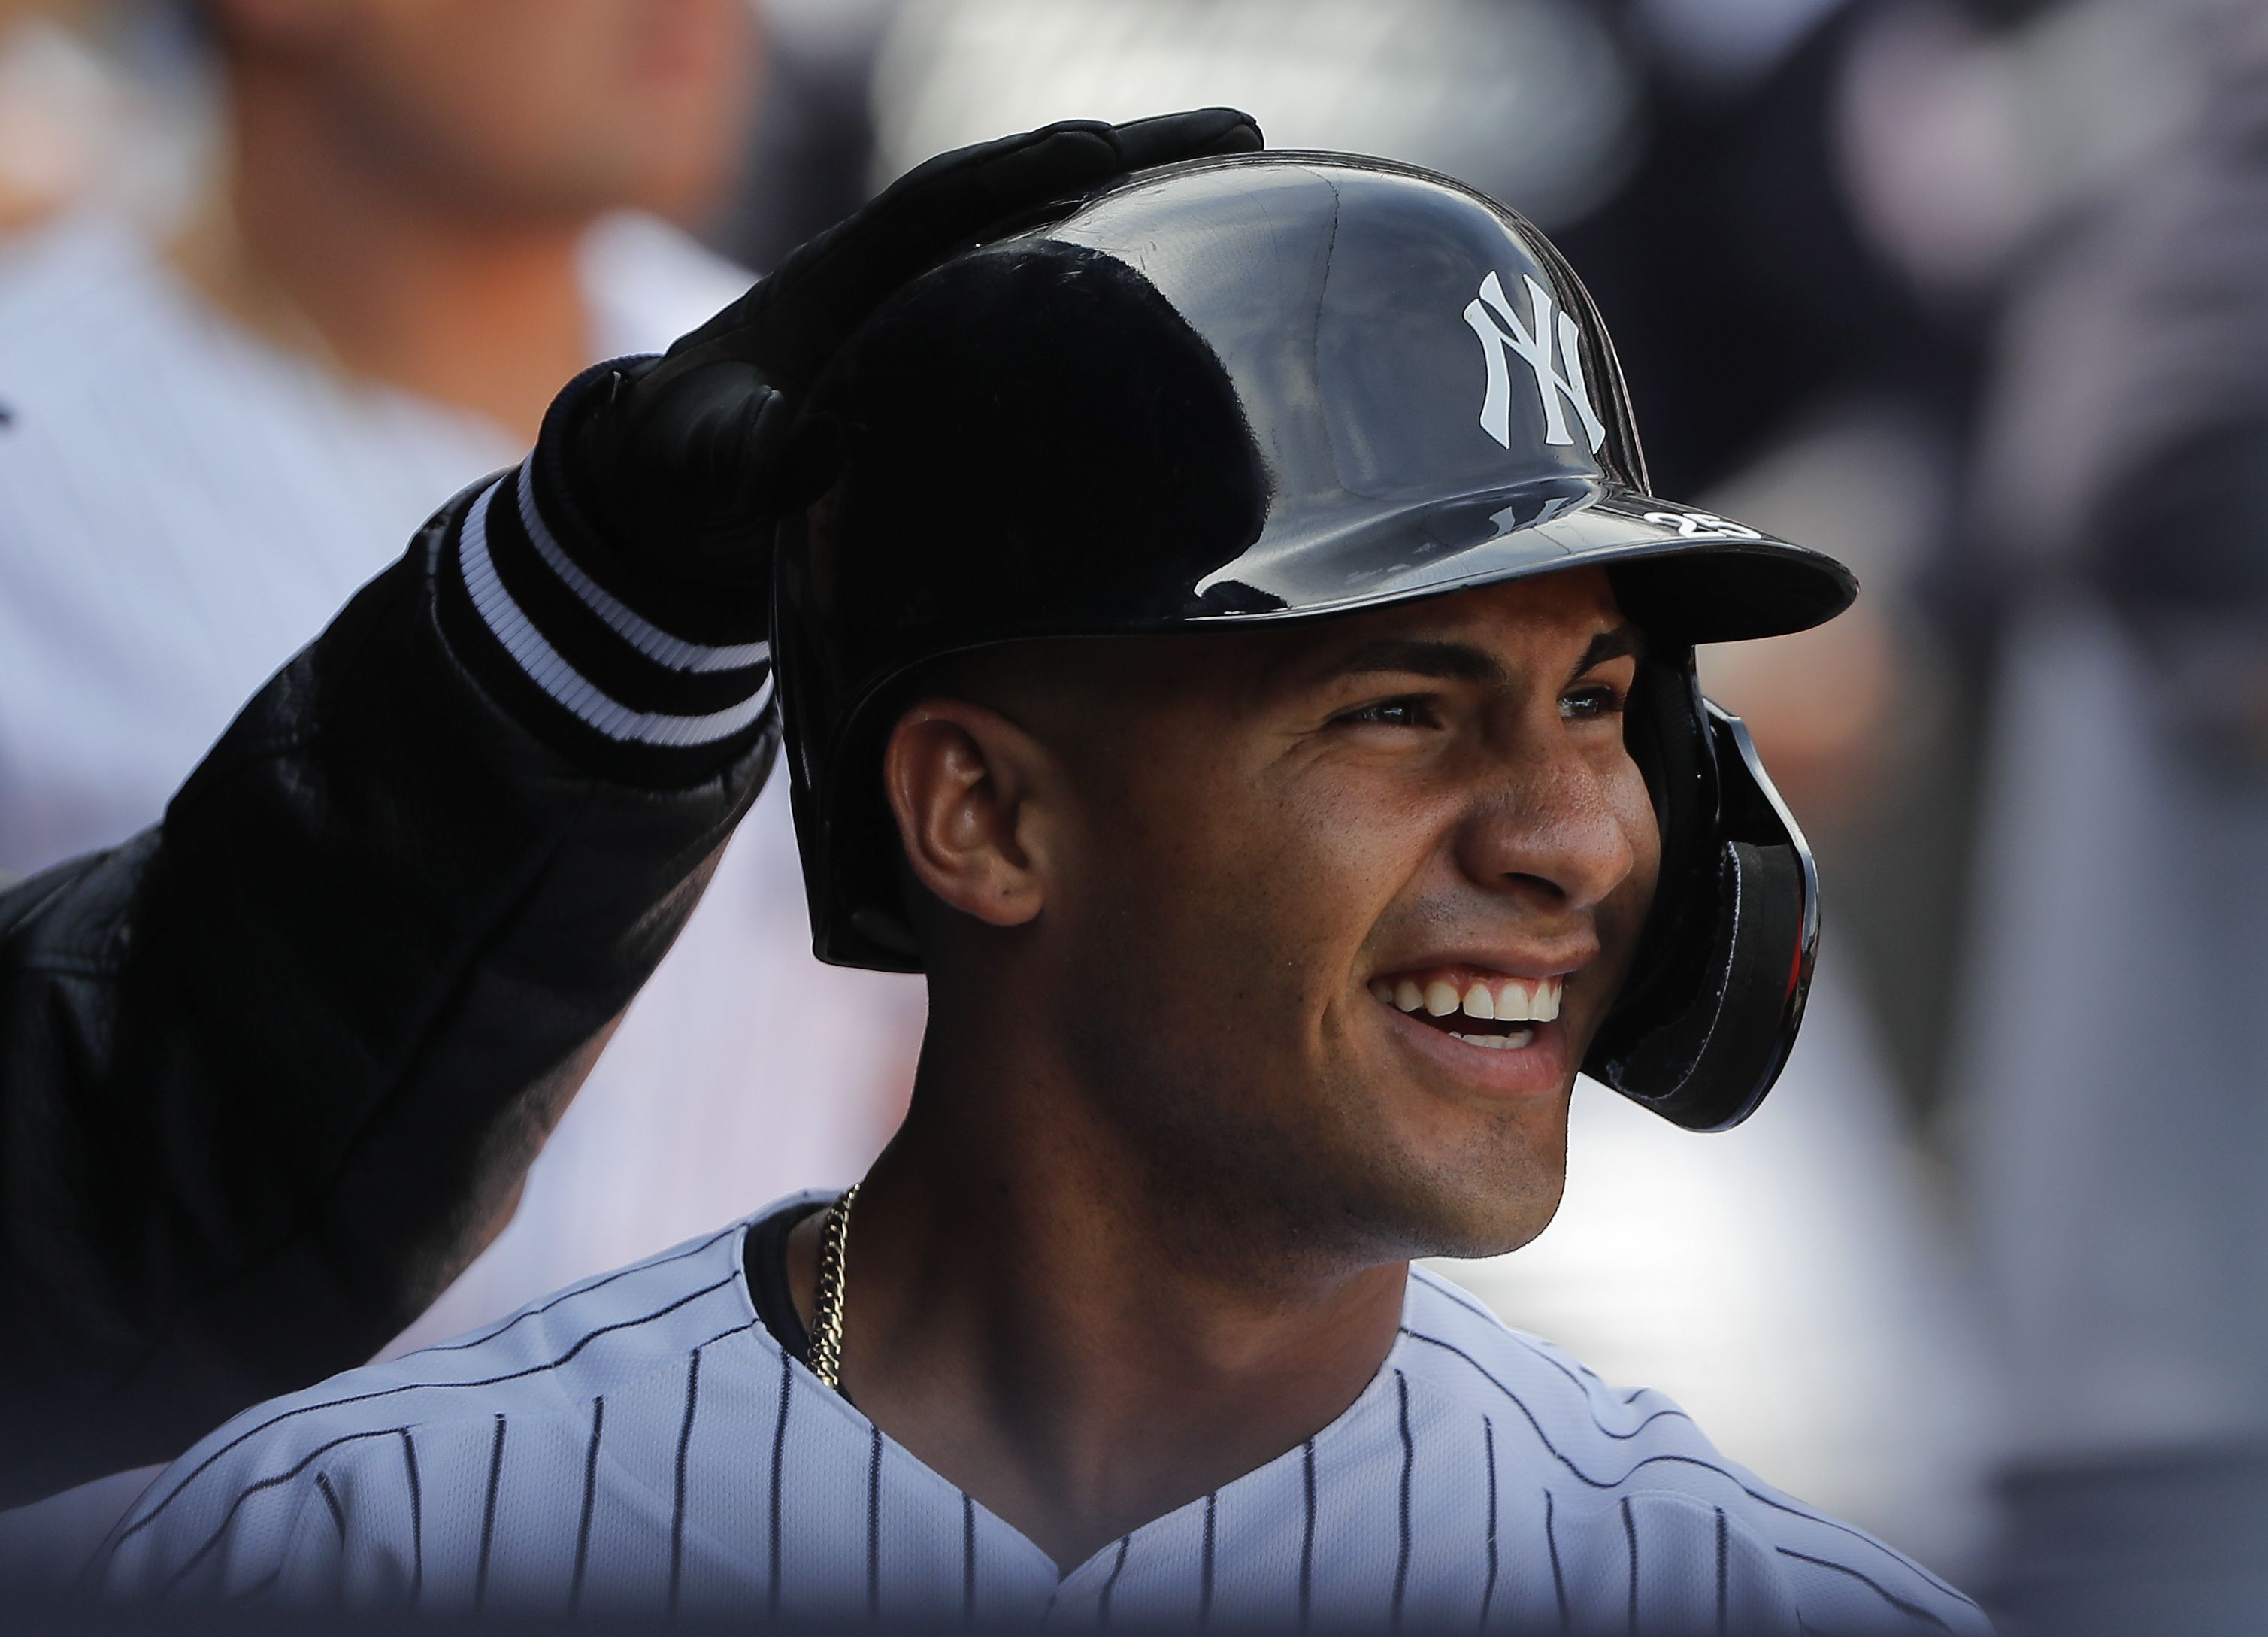 Latest injury news on Yankees' Gleyber Torres, who's seeing doctors 